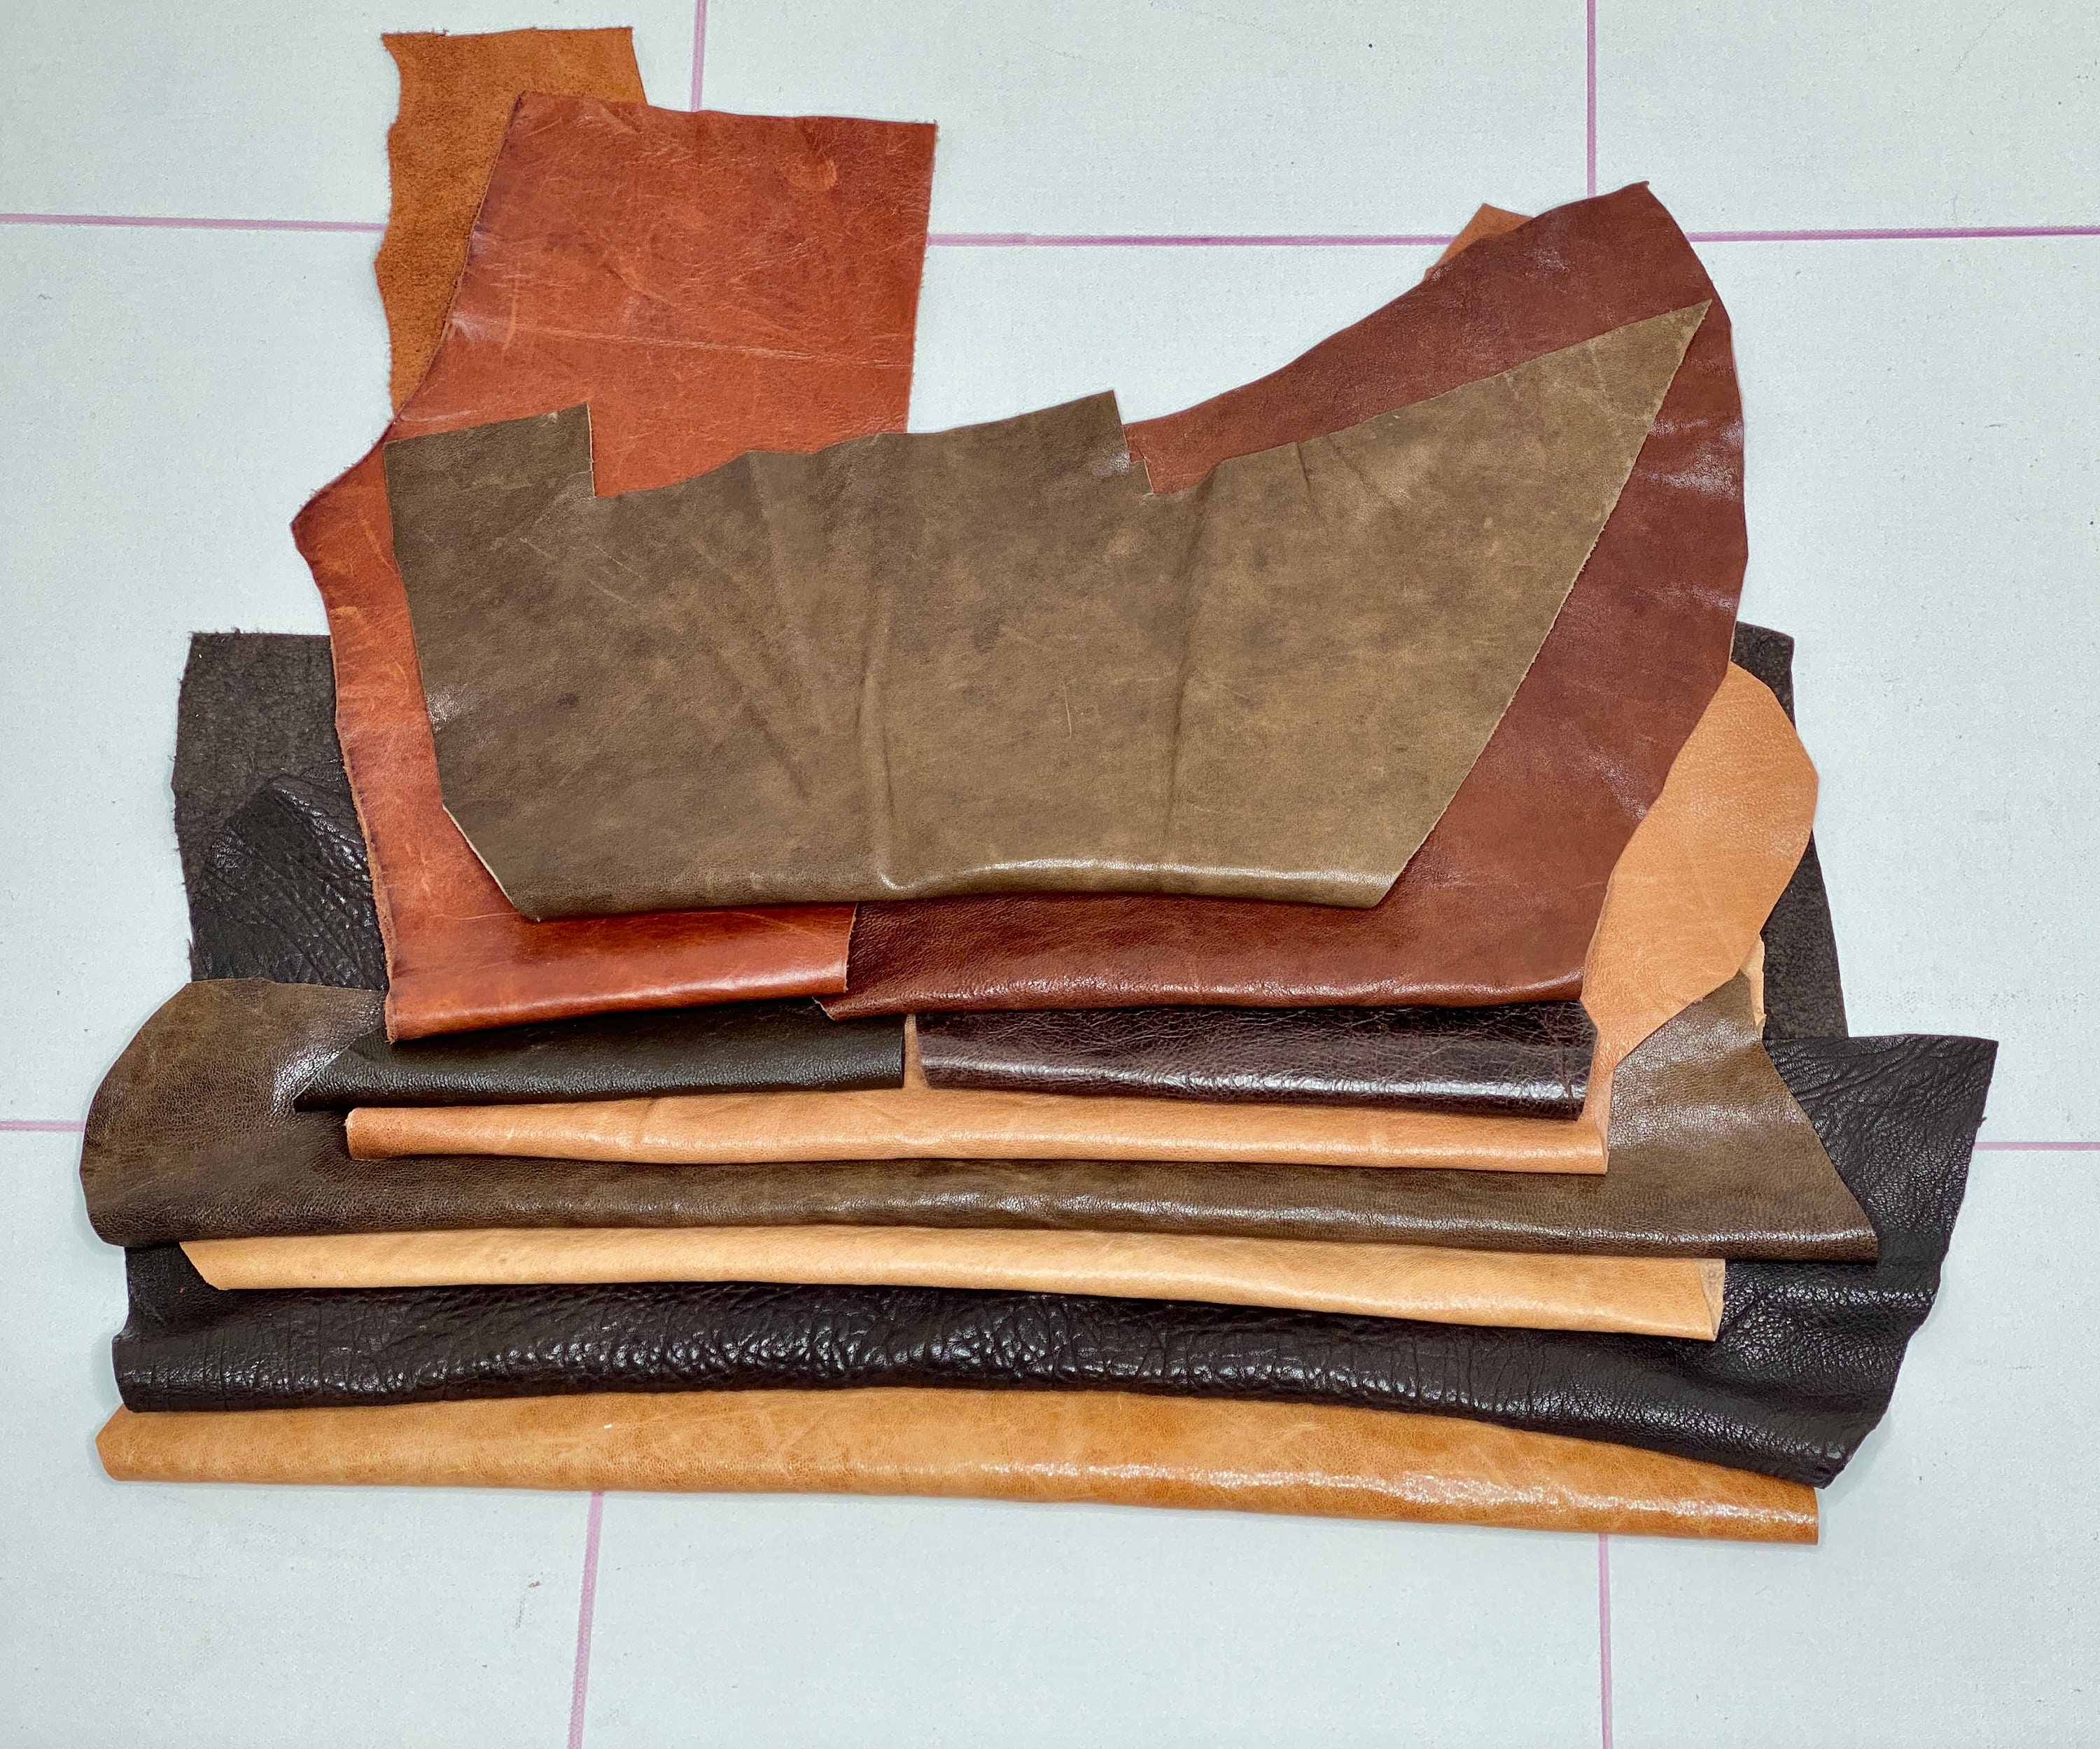 5 Lbs. Cow Leather Scraps for Crafting Large Leather Remnant